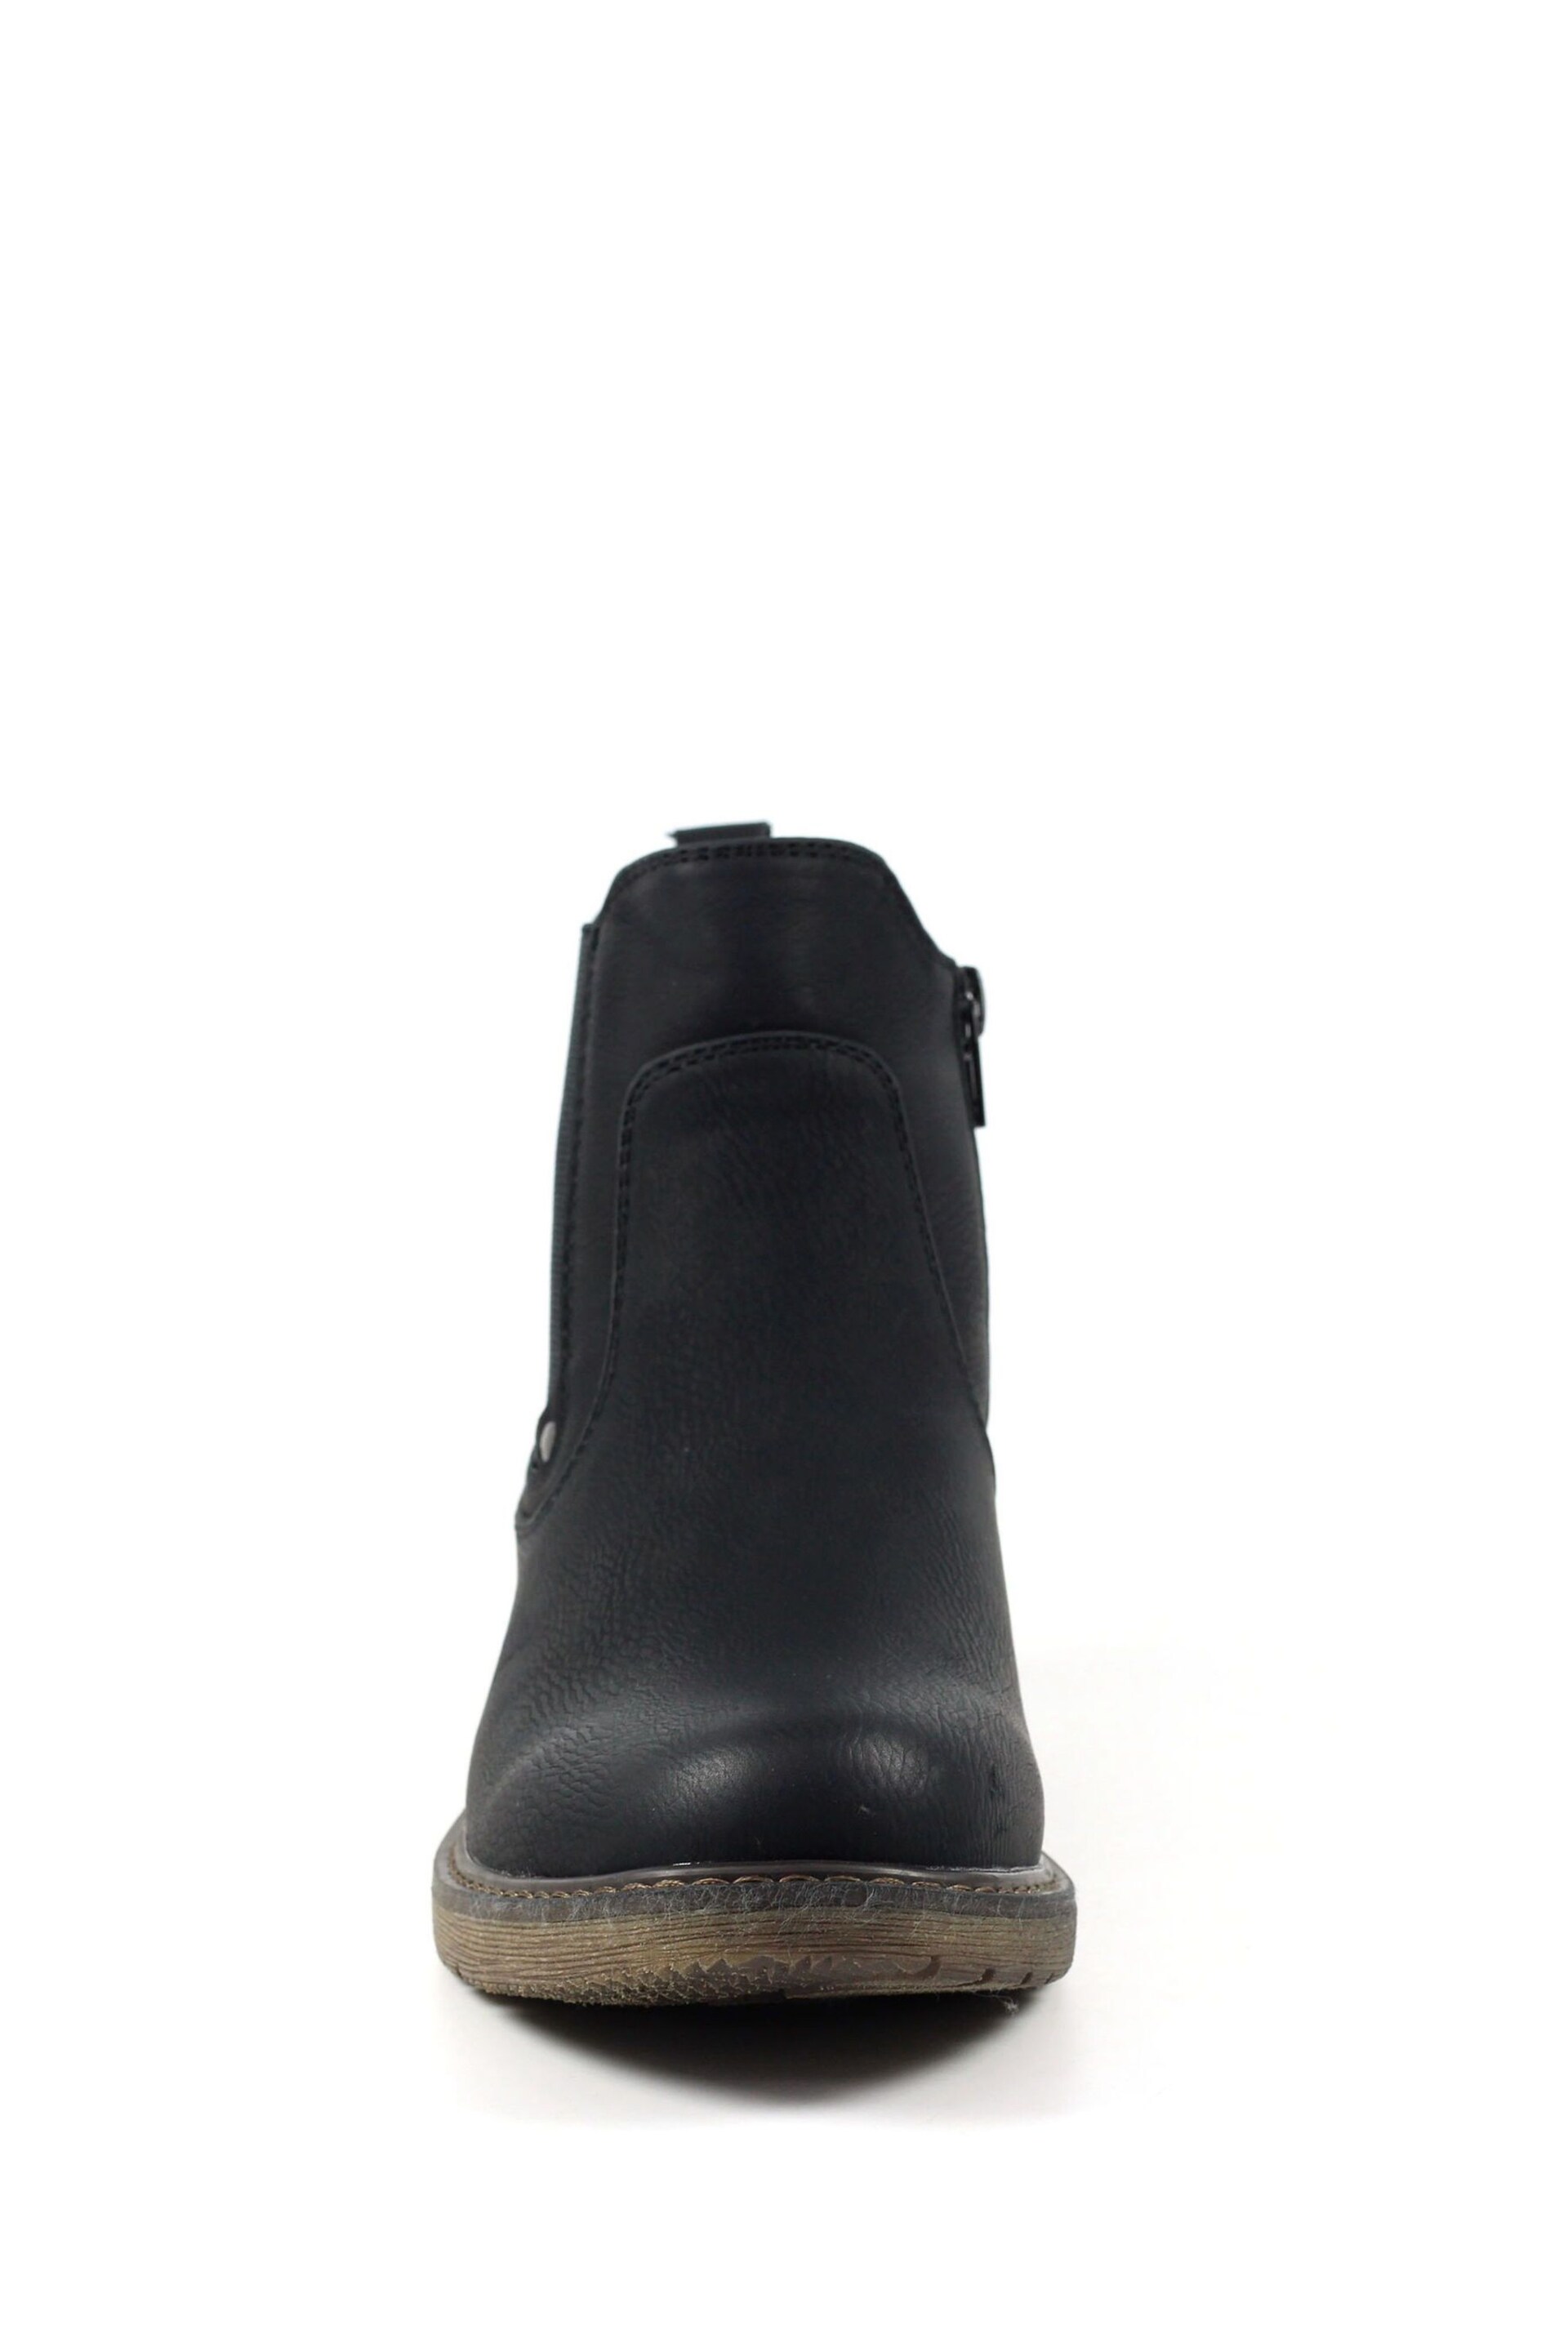 Lunar Roxie II Black Ankle Boots - Image 4 of 8